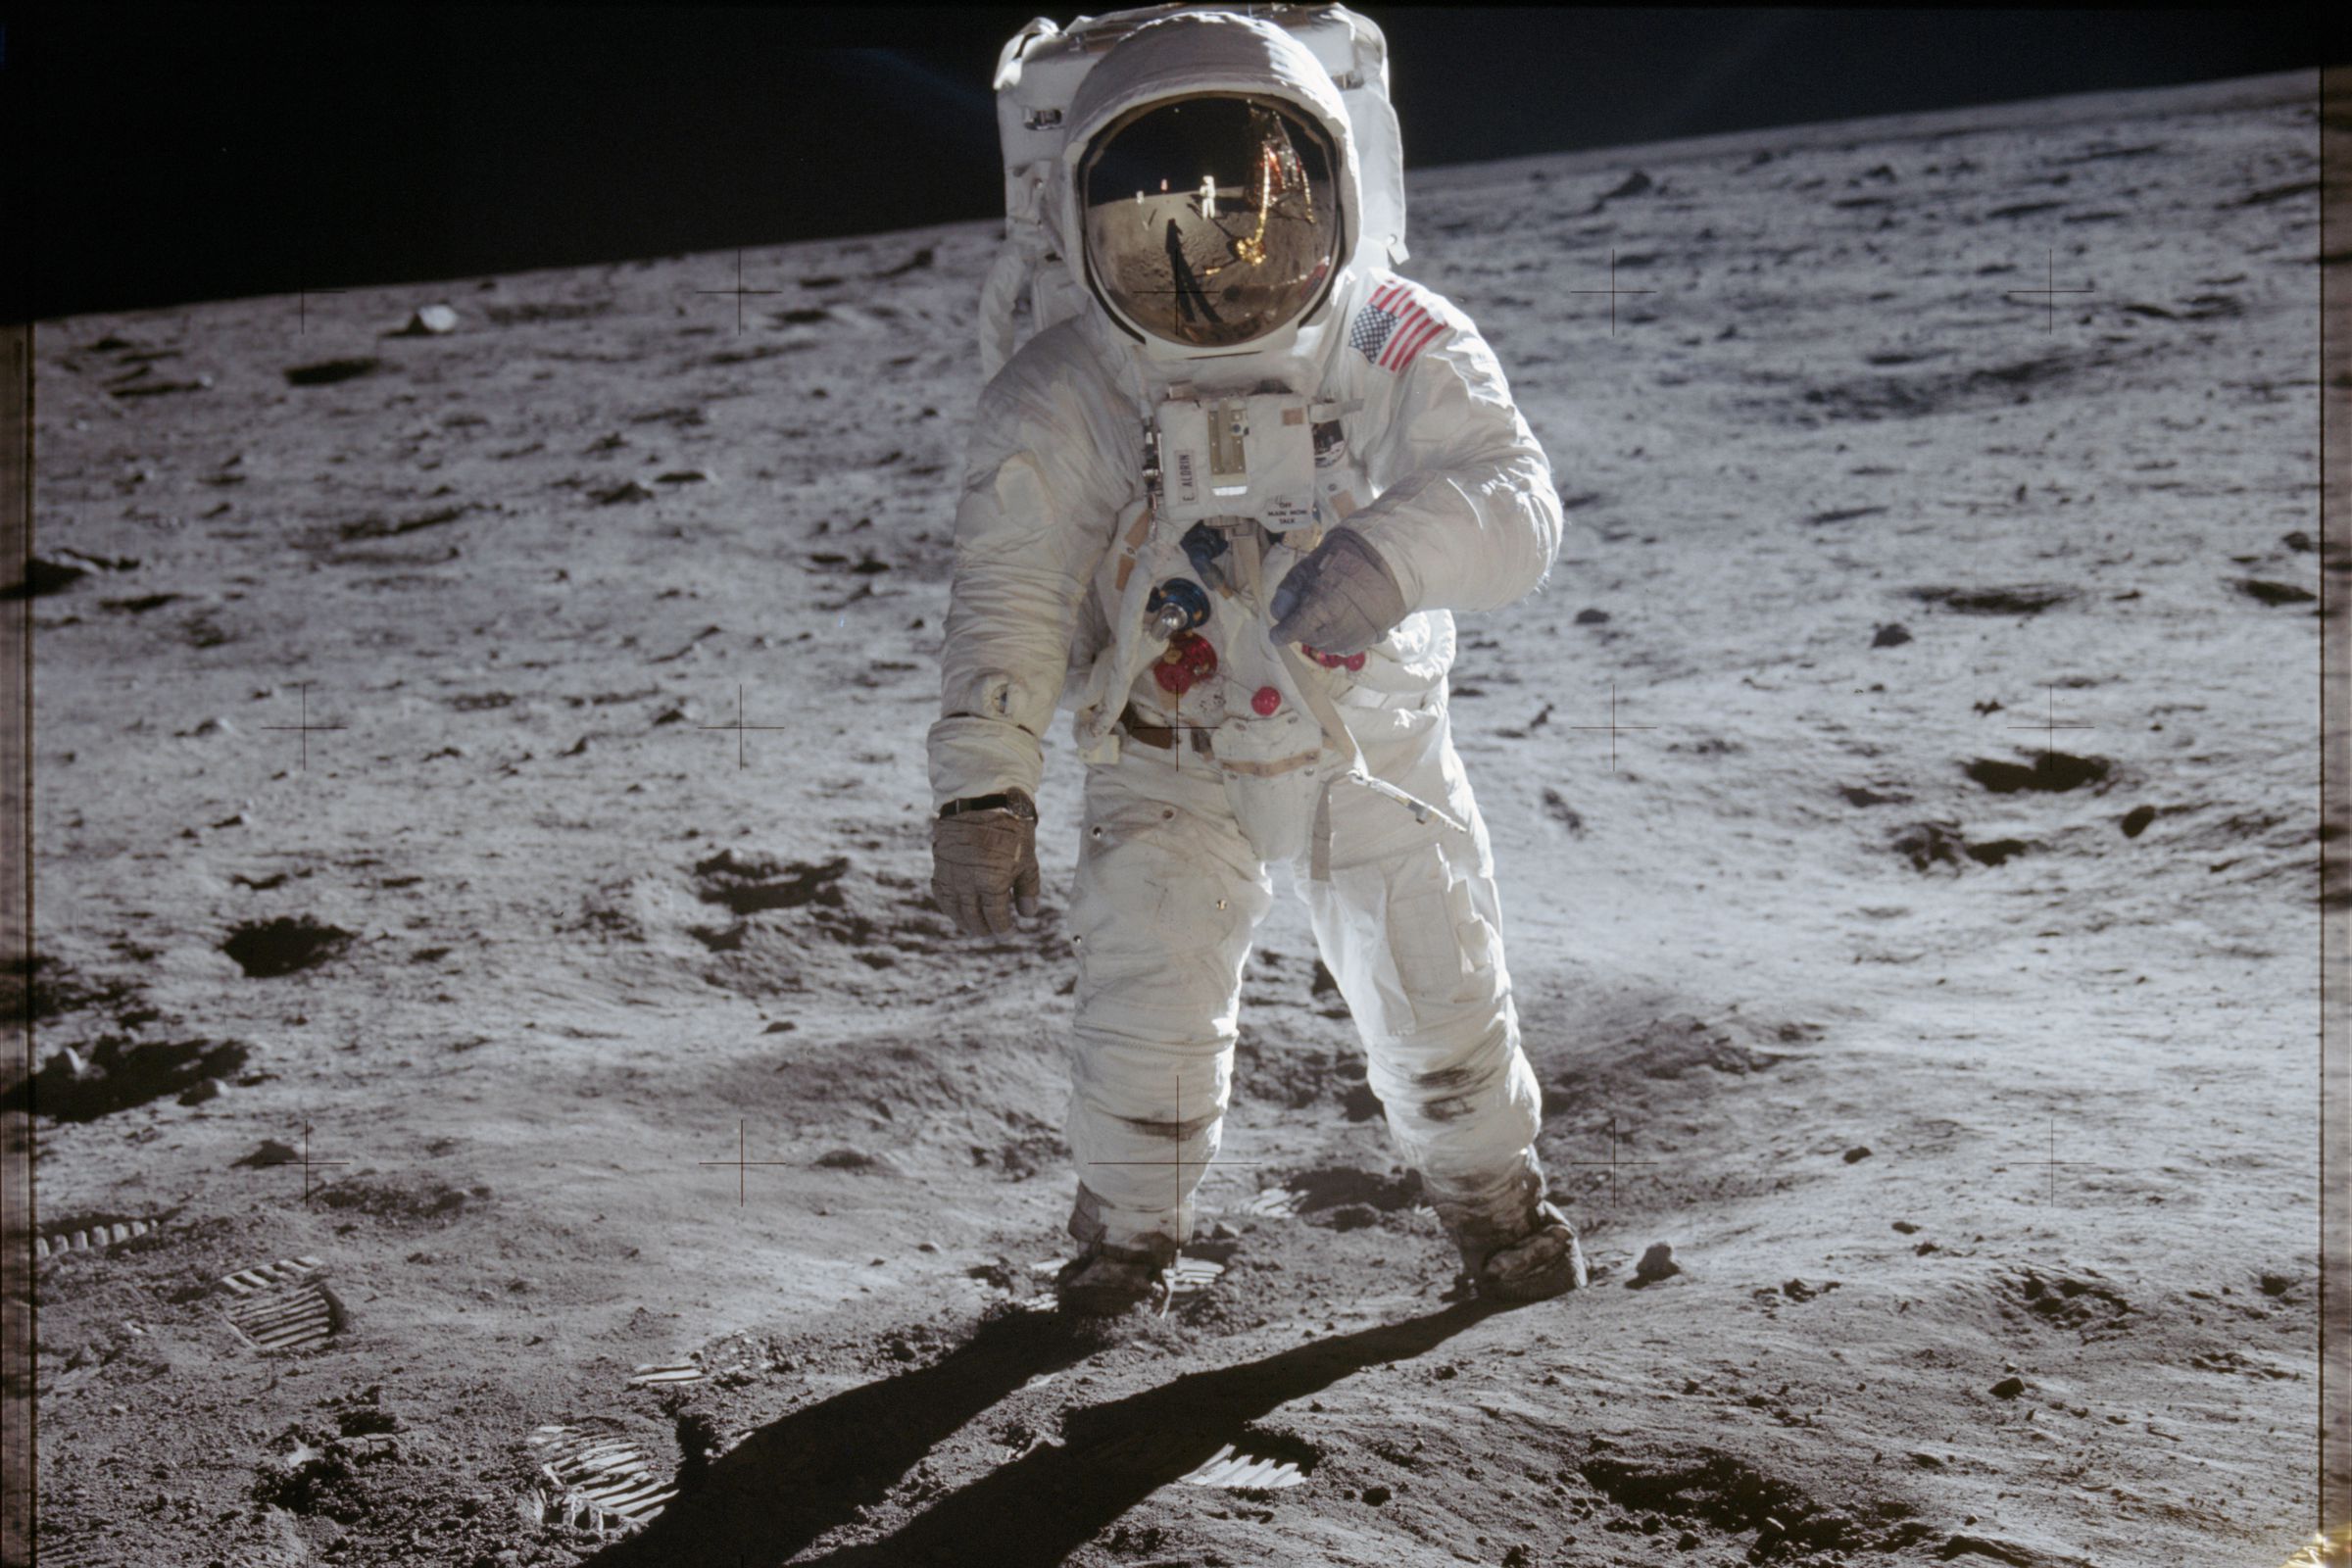 Astronaut in space suit on lunar surface